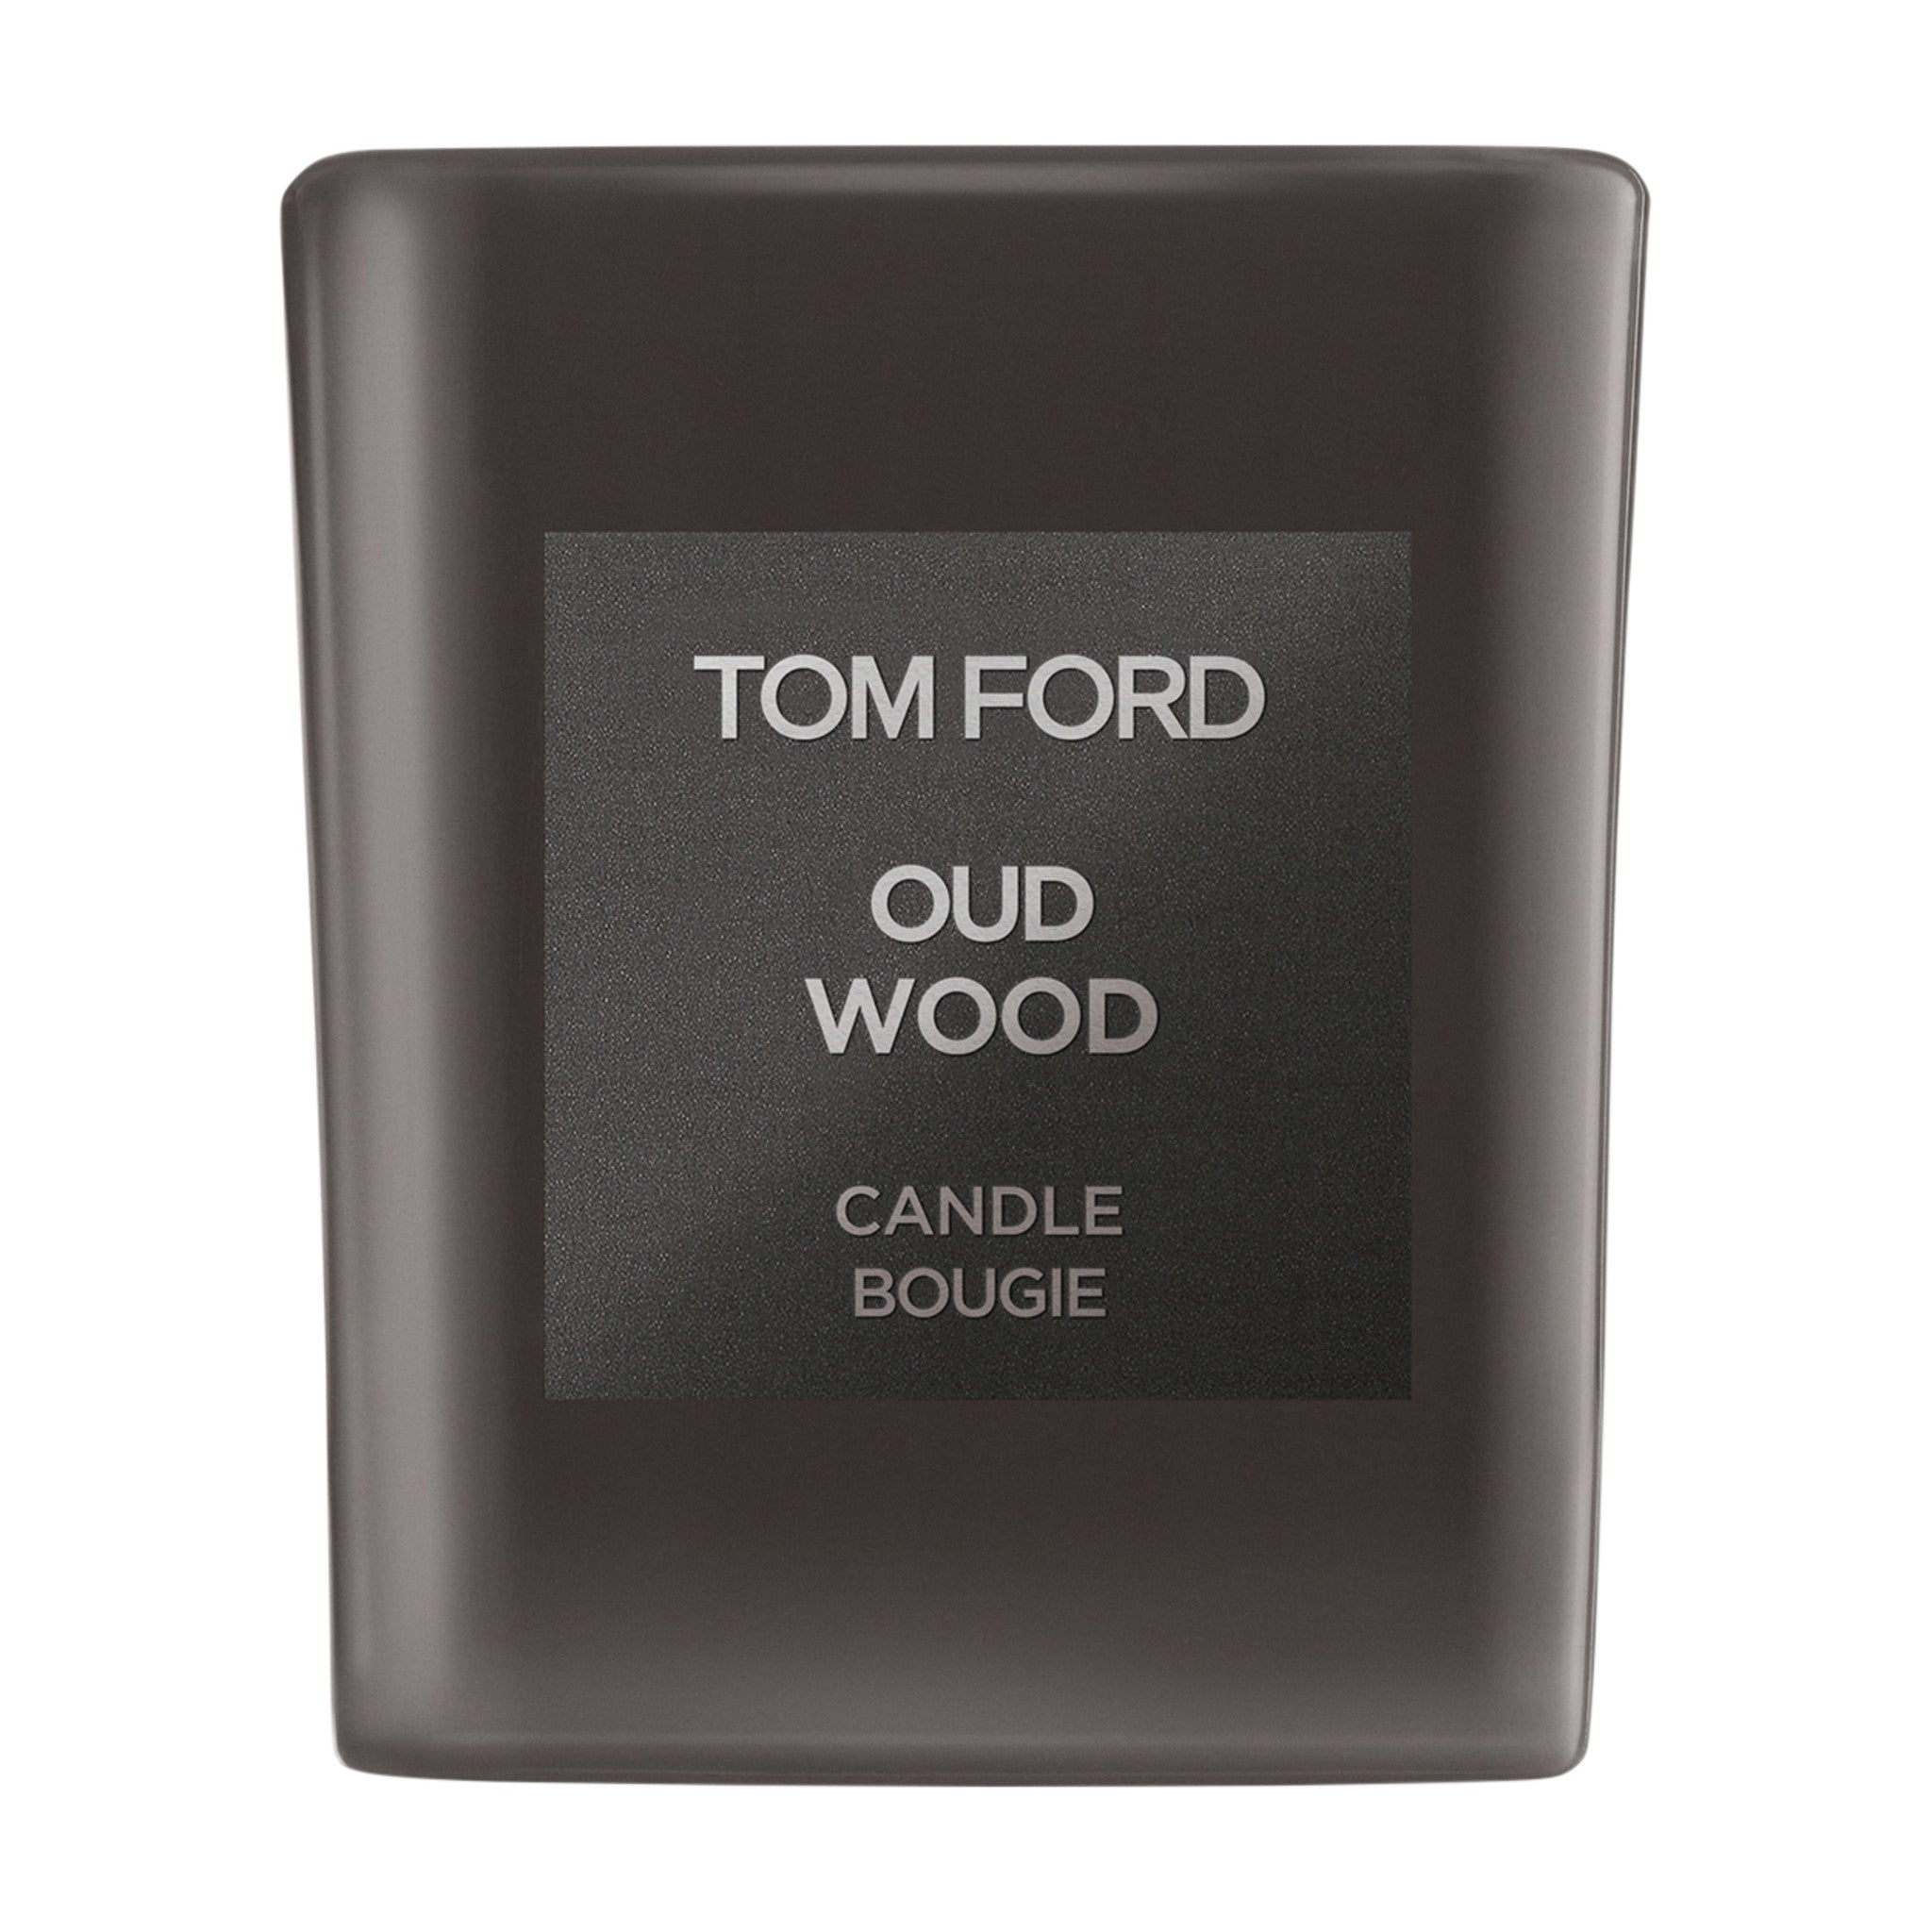 Tom Ford Oud Wood Candle main image.